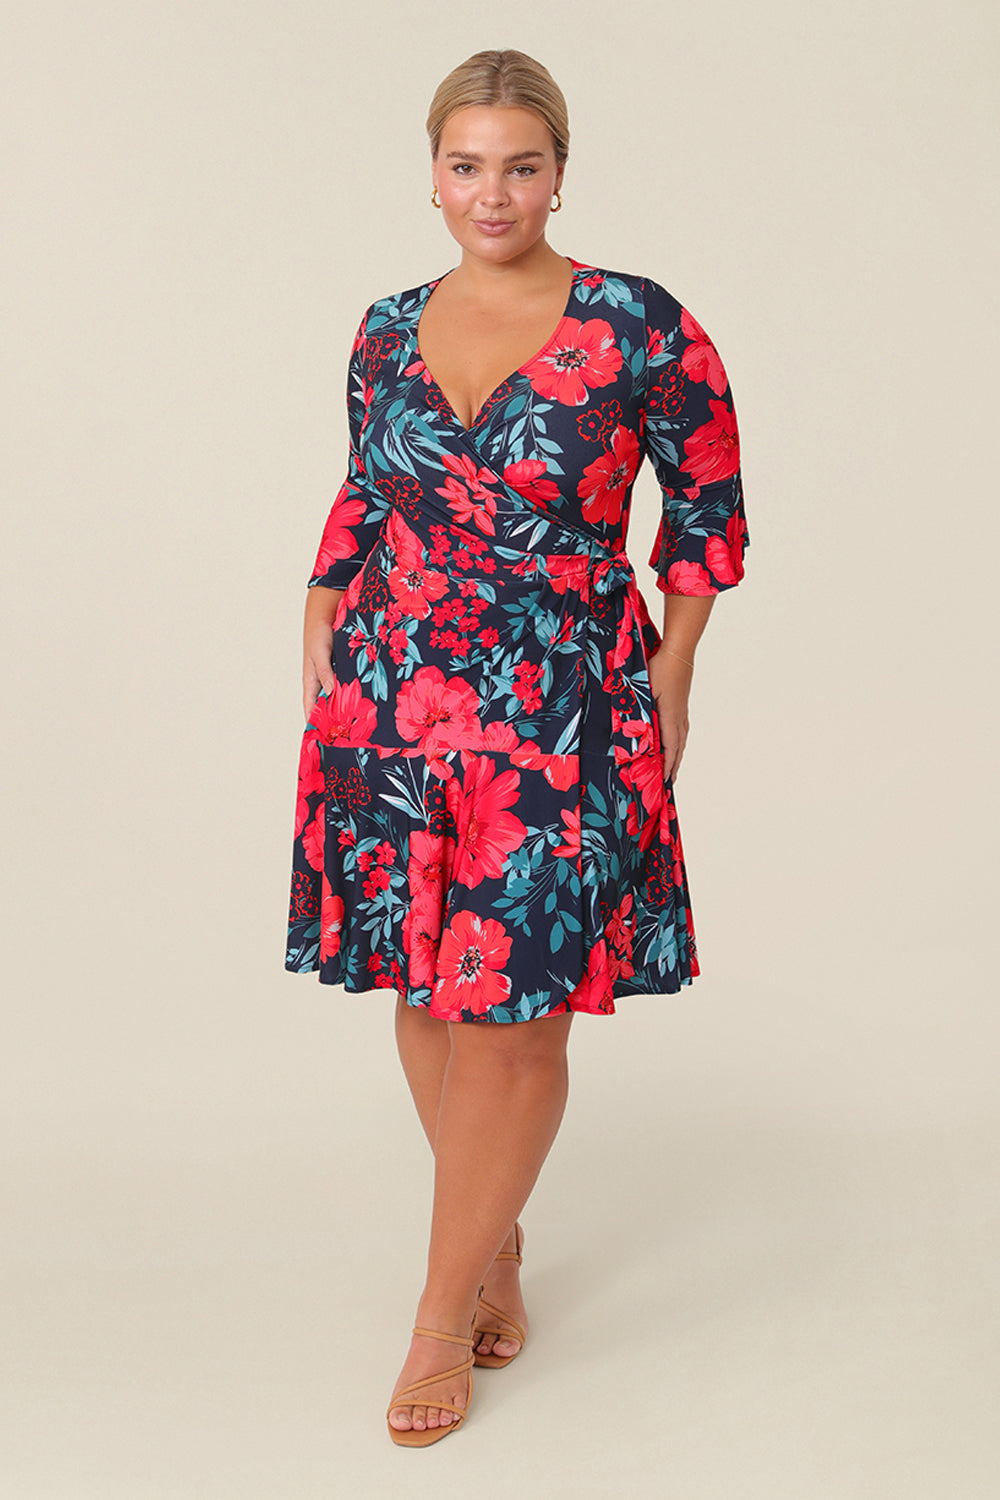 A size 14 petite height woman wears a reversible wrap dress with 3/4 fluted sleeves. Featuring a mini-length skirt with ruffle hem and 3/4 length fluted sleeves, this floral printed jersey dress is has a v-neckline and wears well as an everyday dress. 